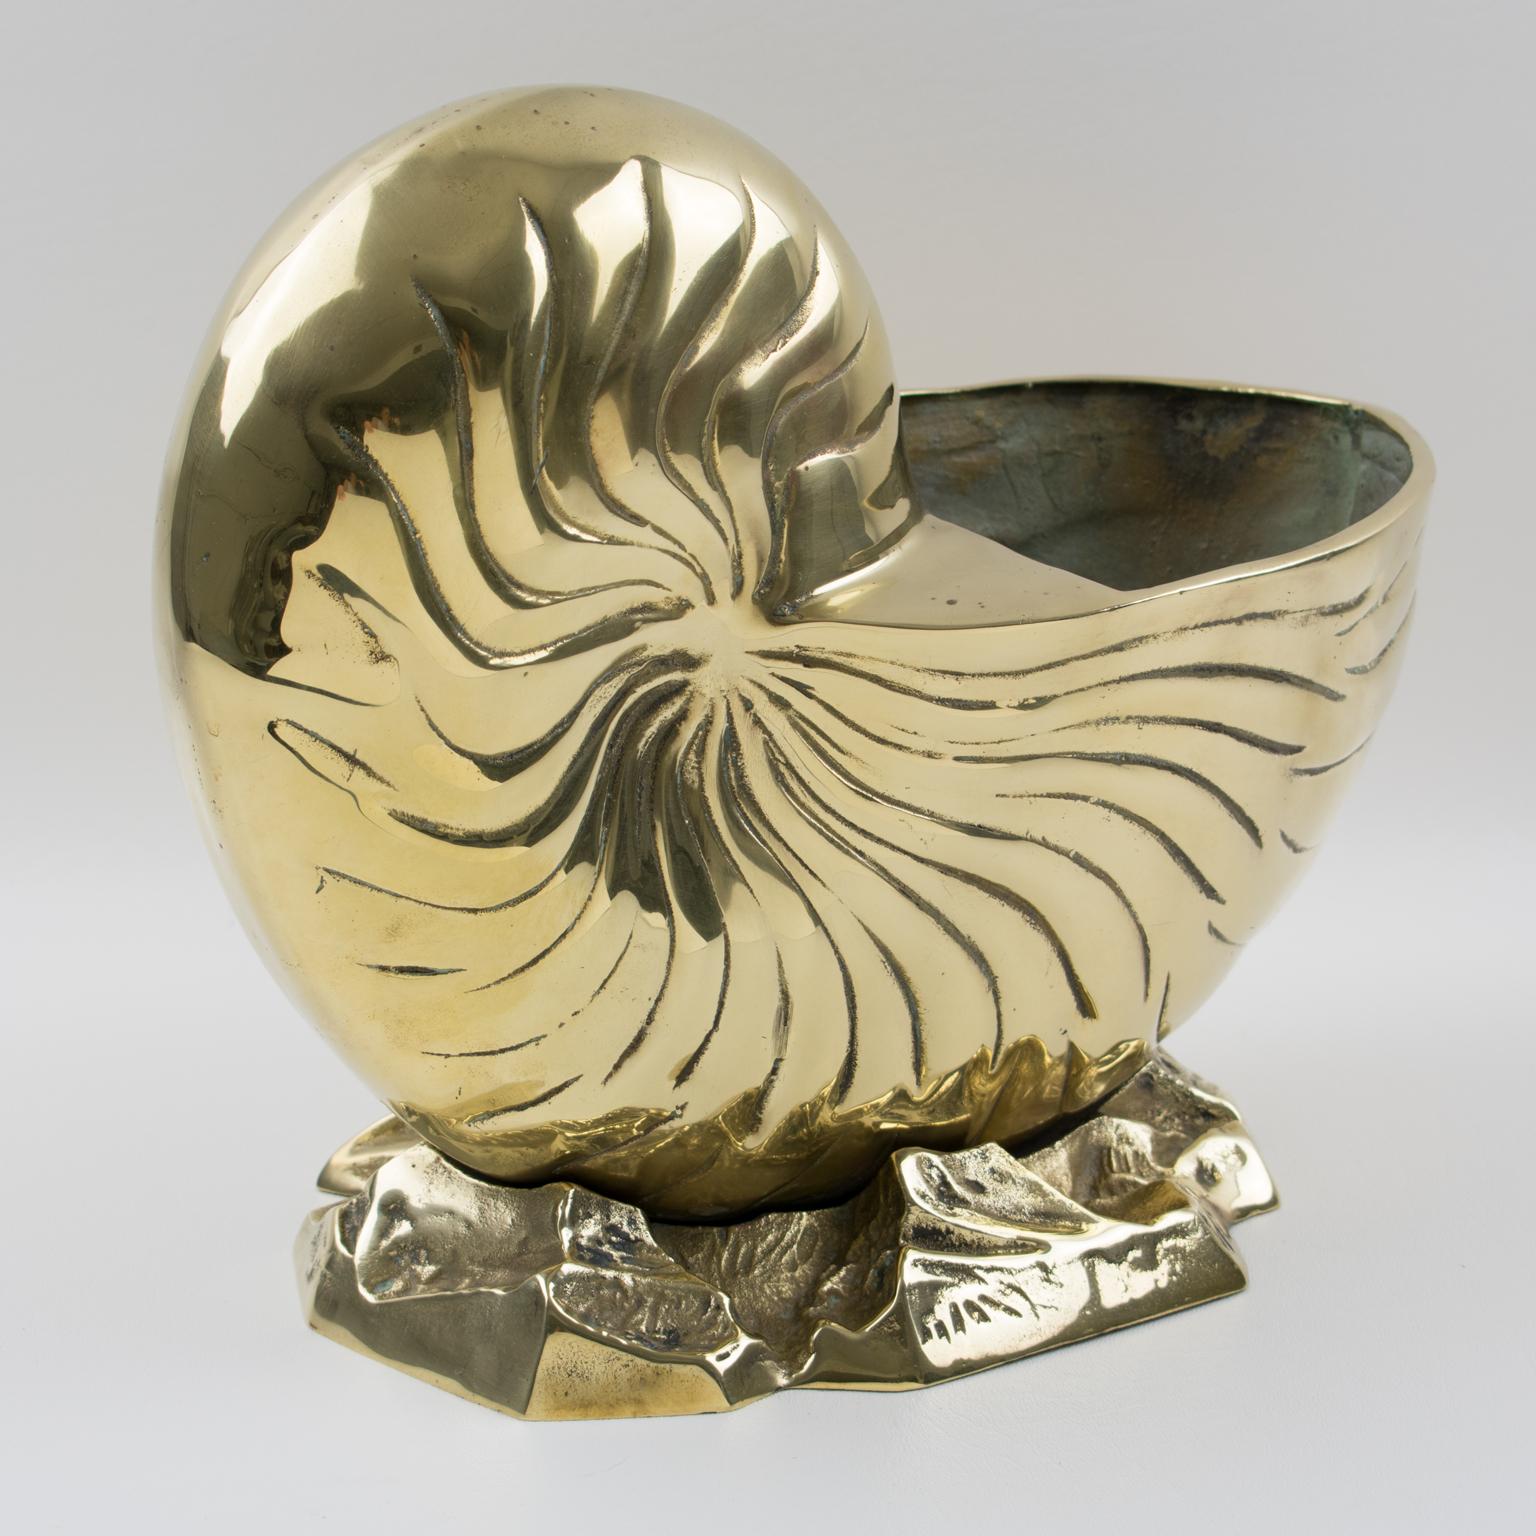 This stylish modernist polished brass animal sculpture is an ultra-chic decorative piece. Use it as a wine cooler or bottler holder, this bar accessory boasts a whimsical sculptural large nautilus shell on a stylized sea-shaped base. This brass